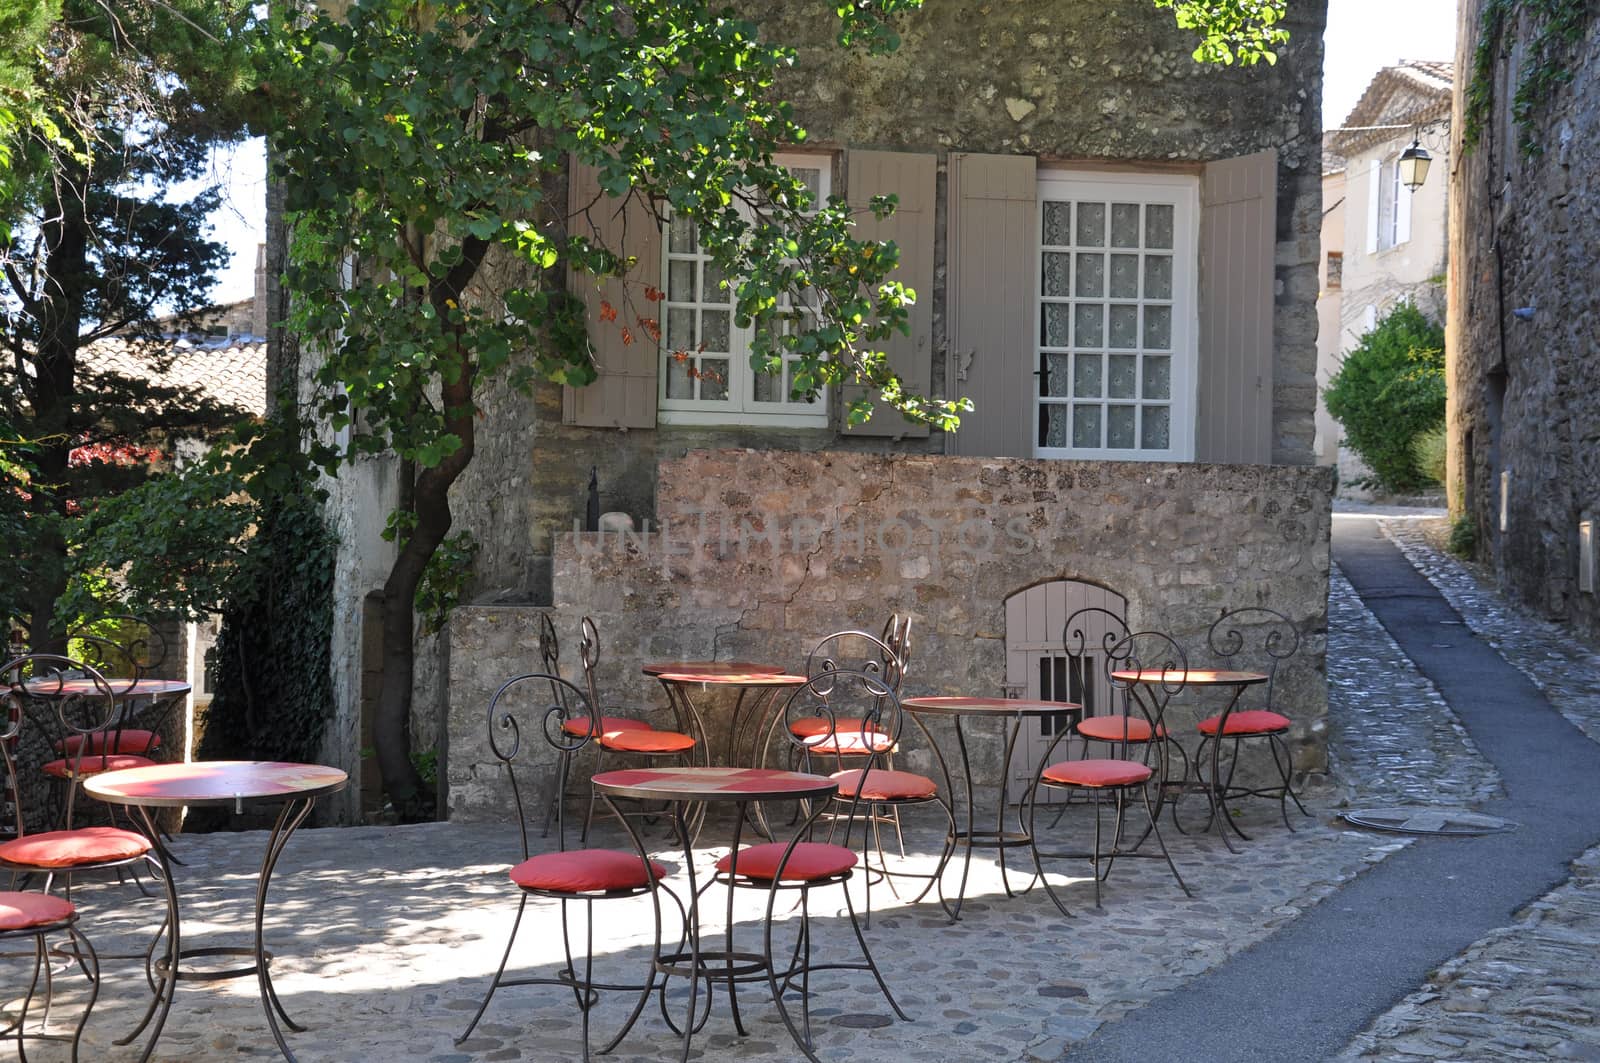 A cafe in the old medieval village of Vaison-la-Romaine, in Provence, France. (taken in the Haute Ville)